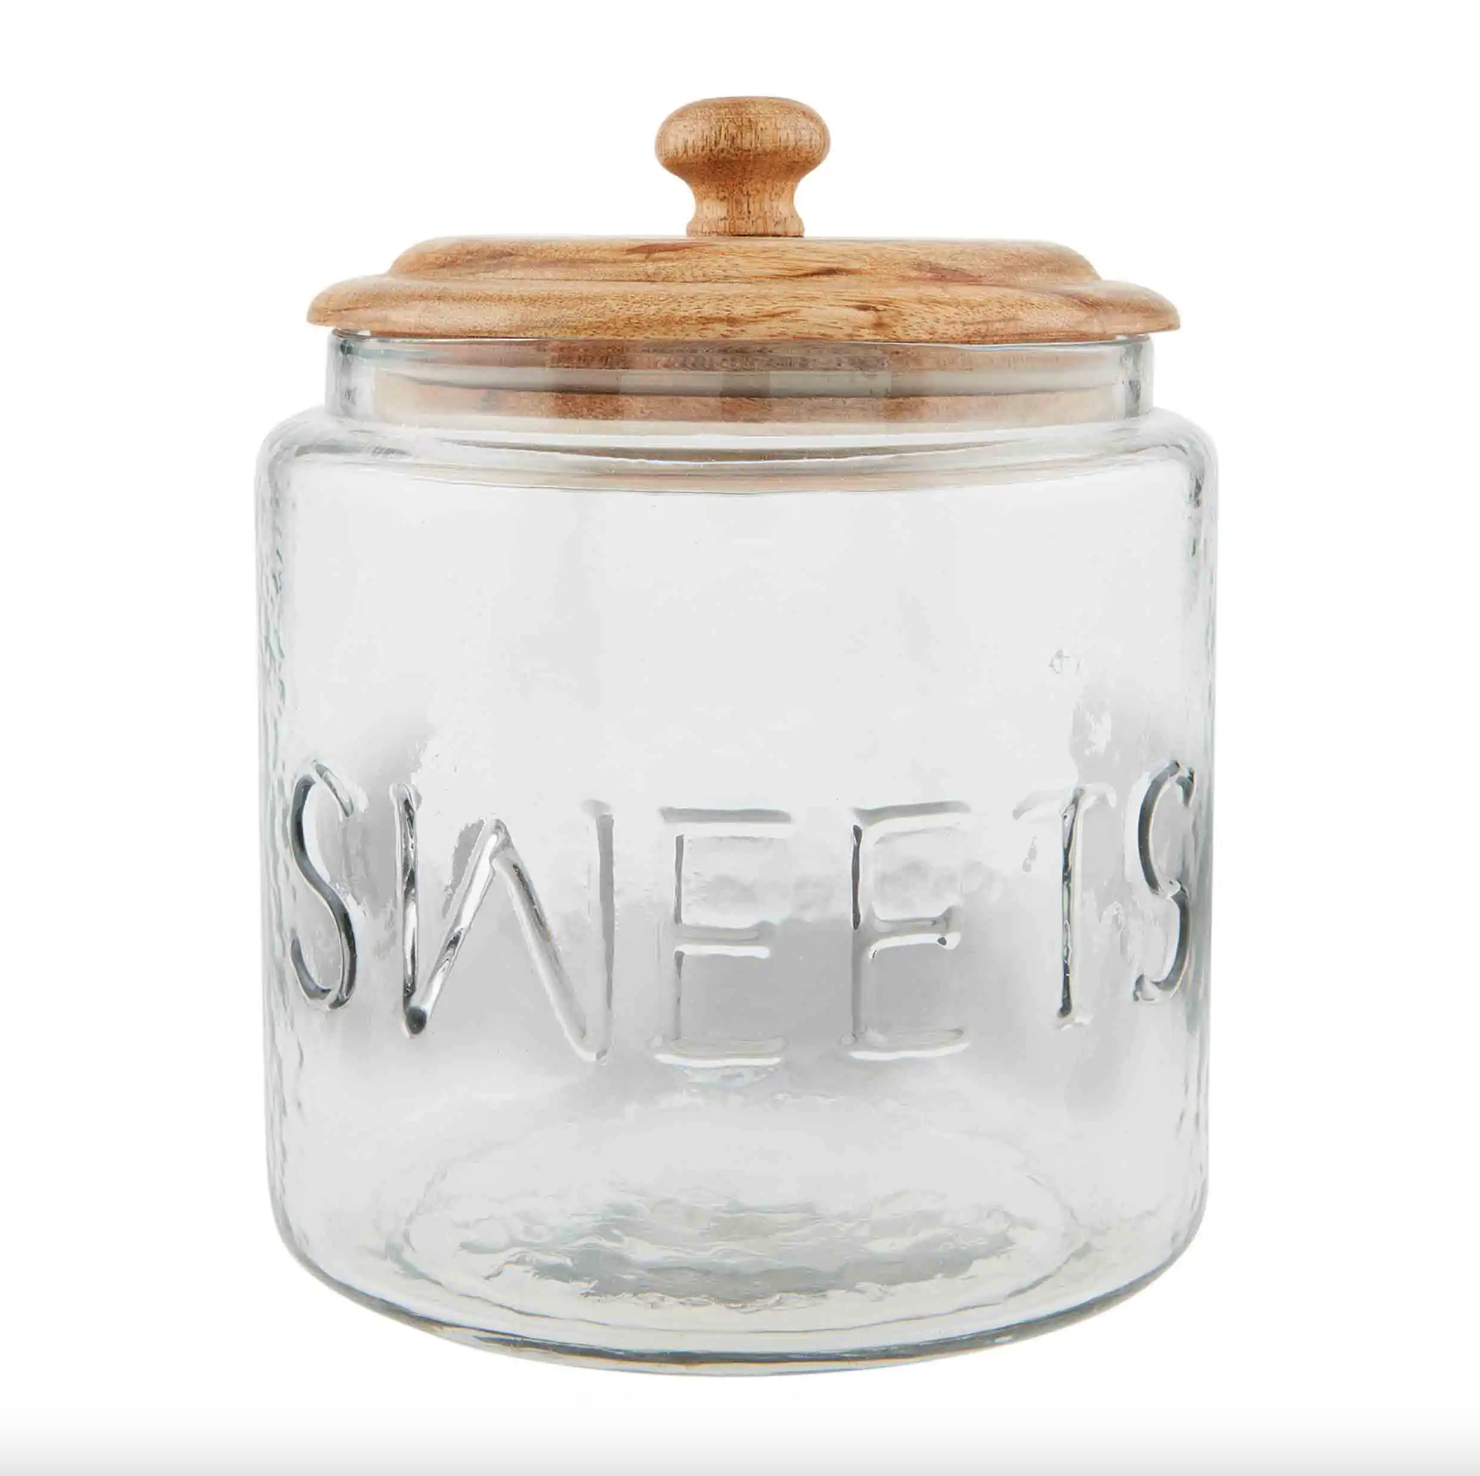 Glass Sweets Jar Home Decor in  at Wrapsody